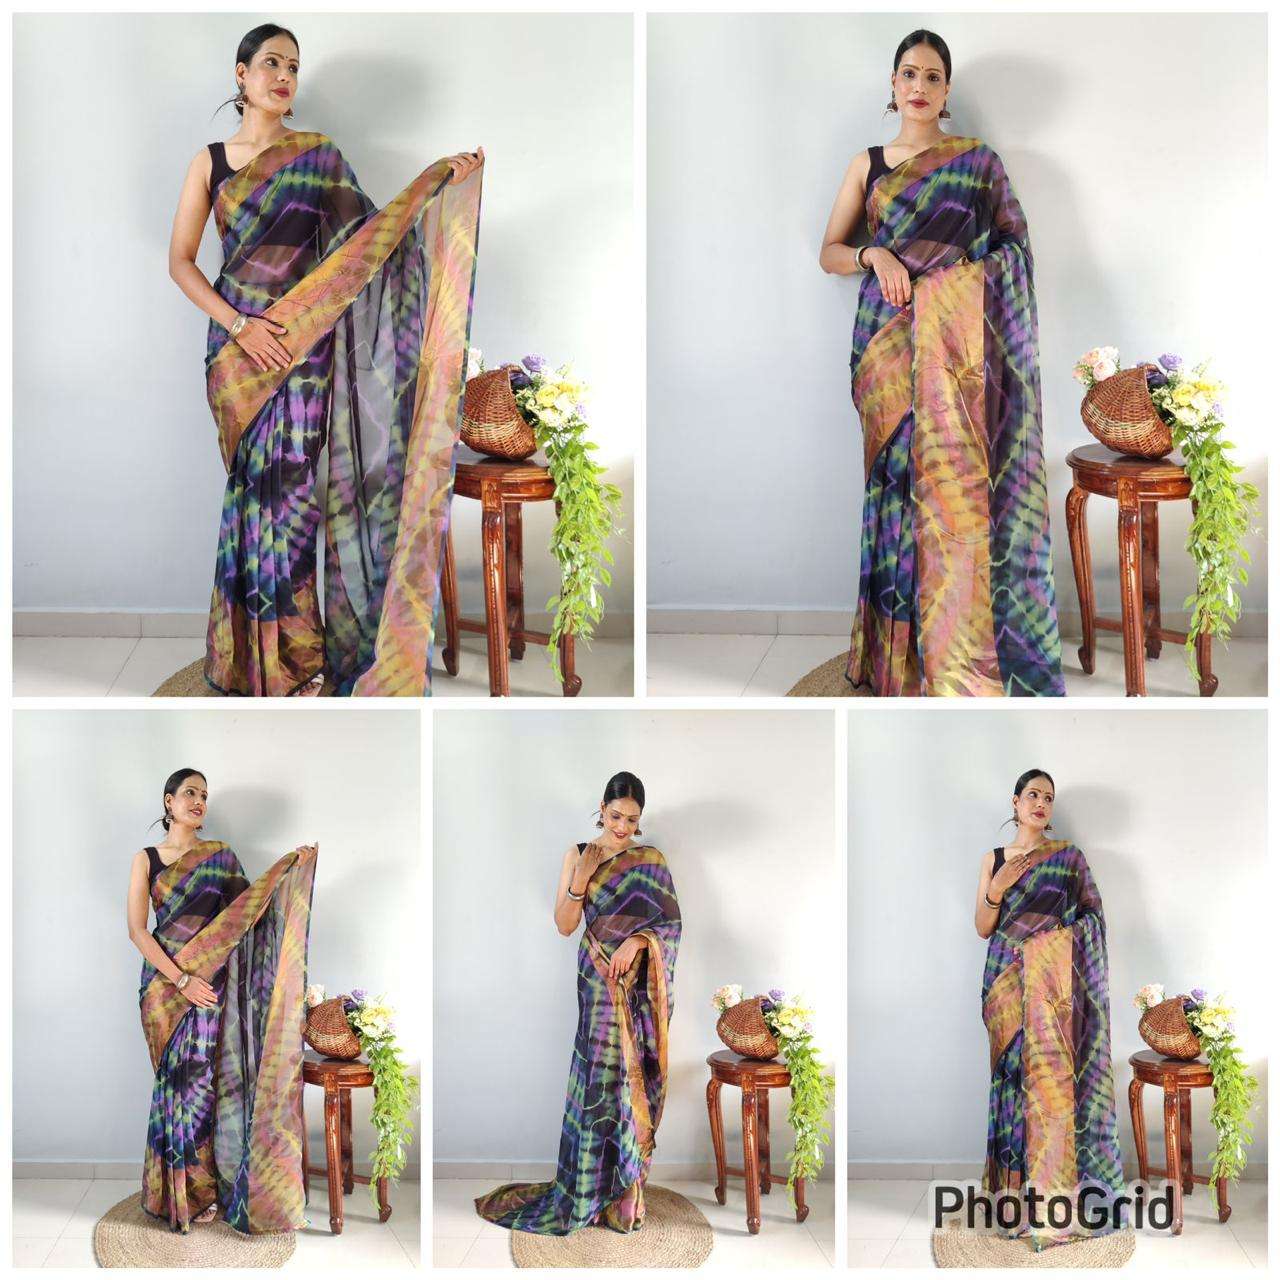 presents new arrivals now in trend ready to wear saree launching most beautiful 1 min saree with our real modeling shoot our real modeling shoot 1 min ready to wear saree